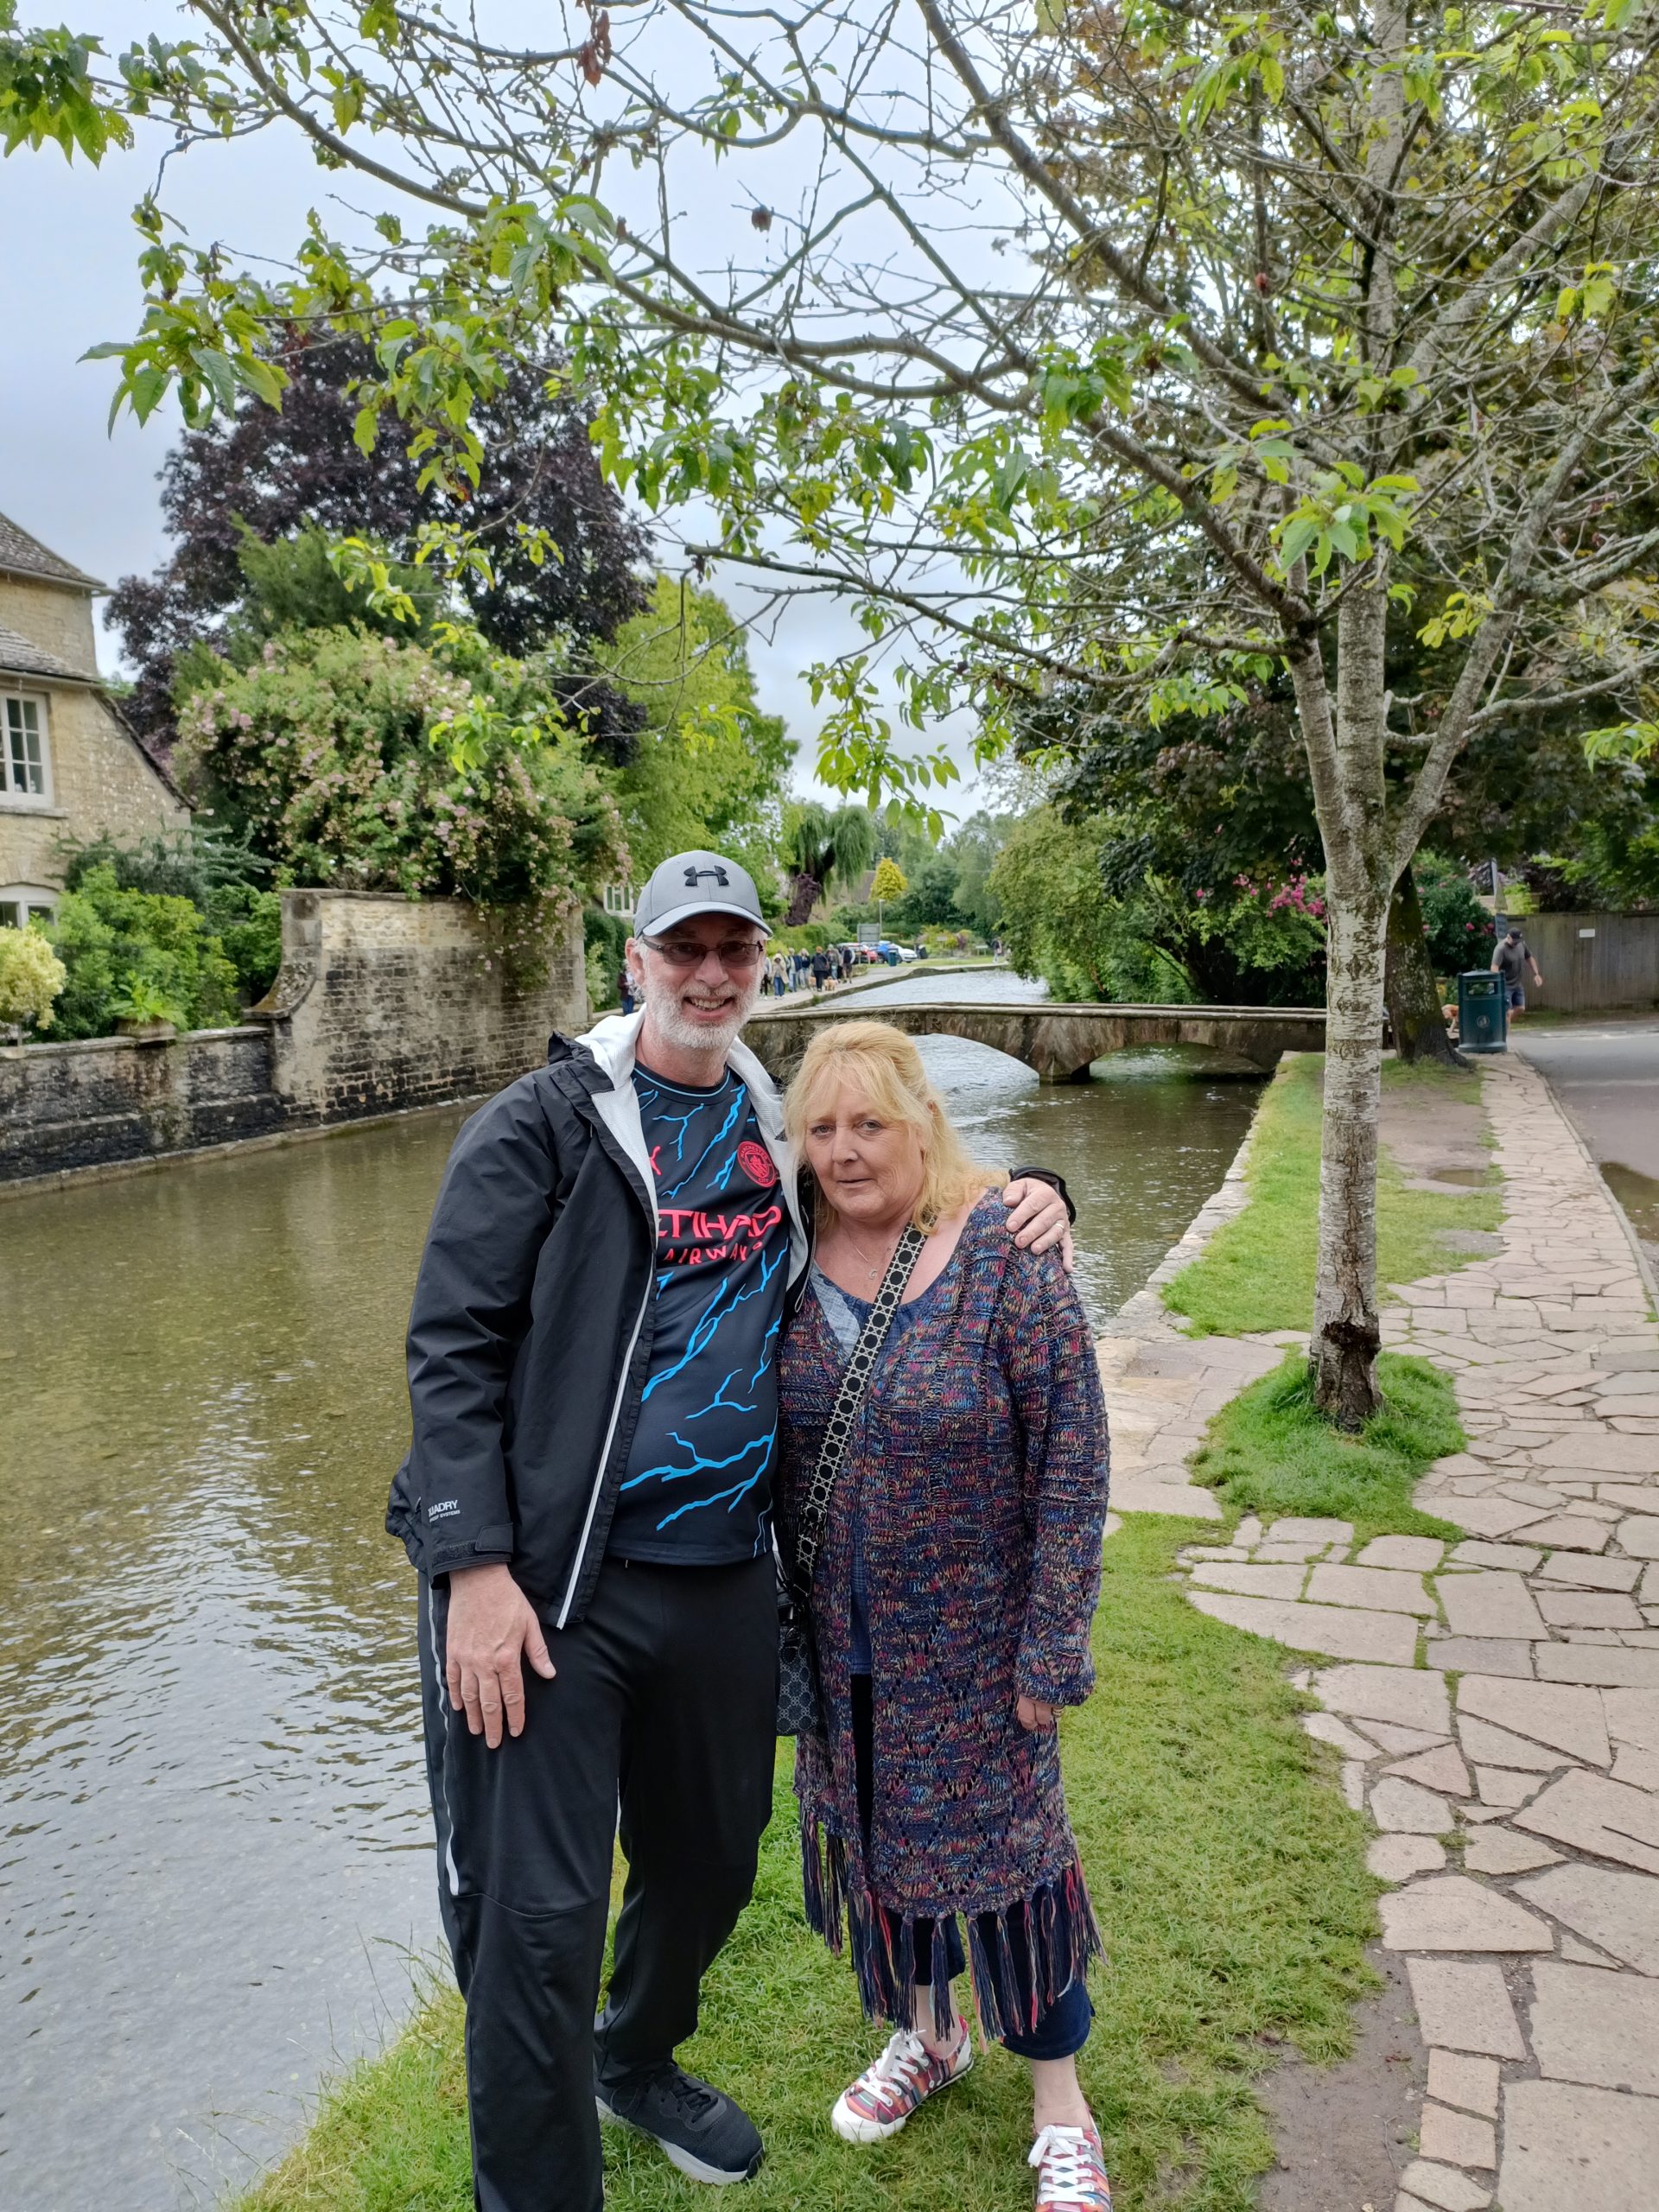 Mike and his wife in the Cotswolds